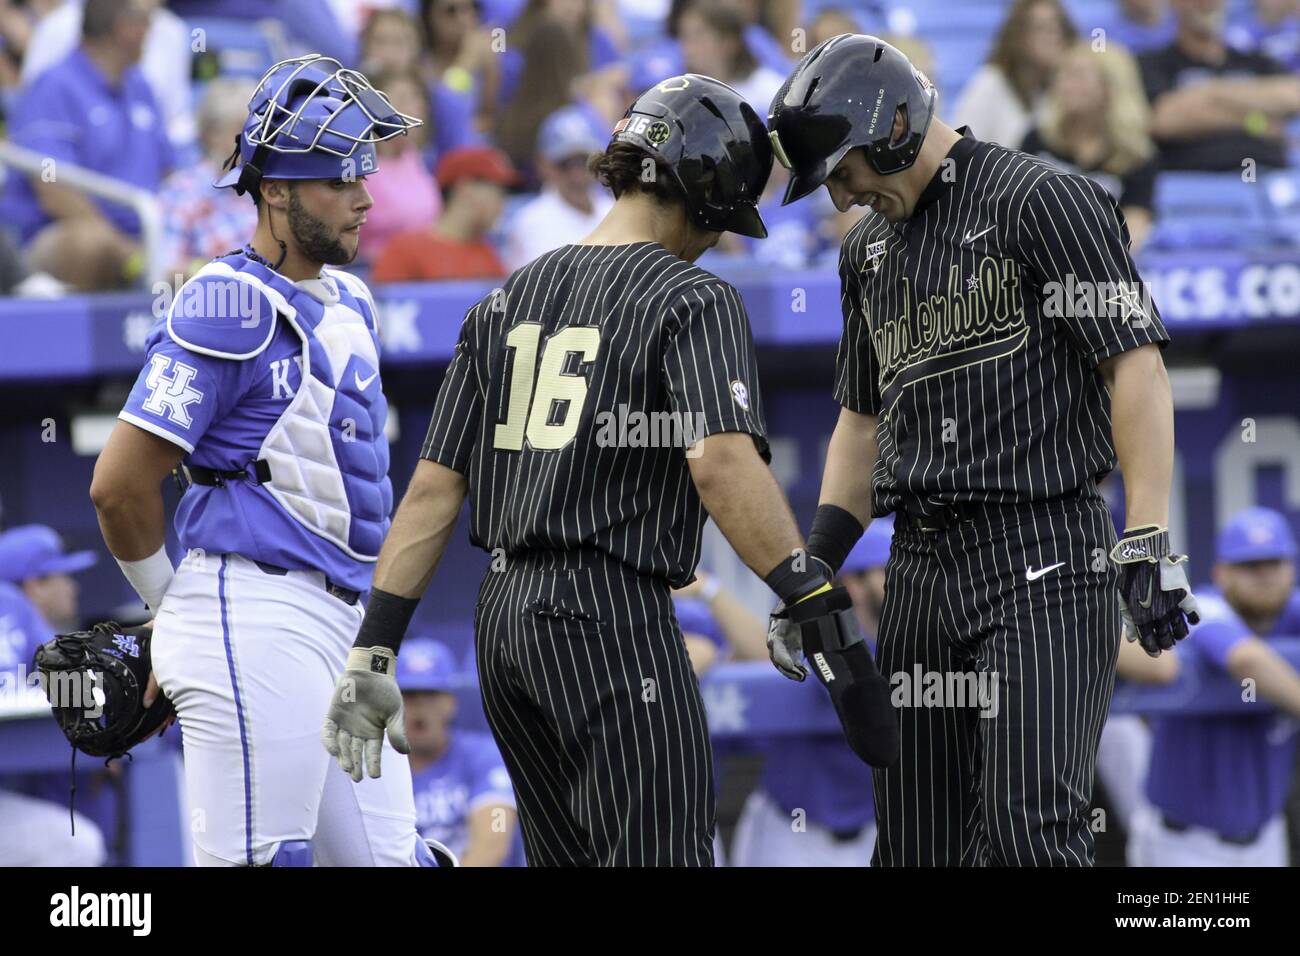 May 17, 2019: Vanderbilt's Austin Martin (16) and JJ Bleday (right)  celebrate Bleday's home run while Kentucky's Coltyn Kessler looks on during  a game between the Kentucky Wildcats and the Vanderbilt Commodores